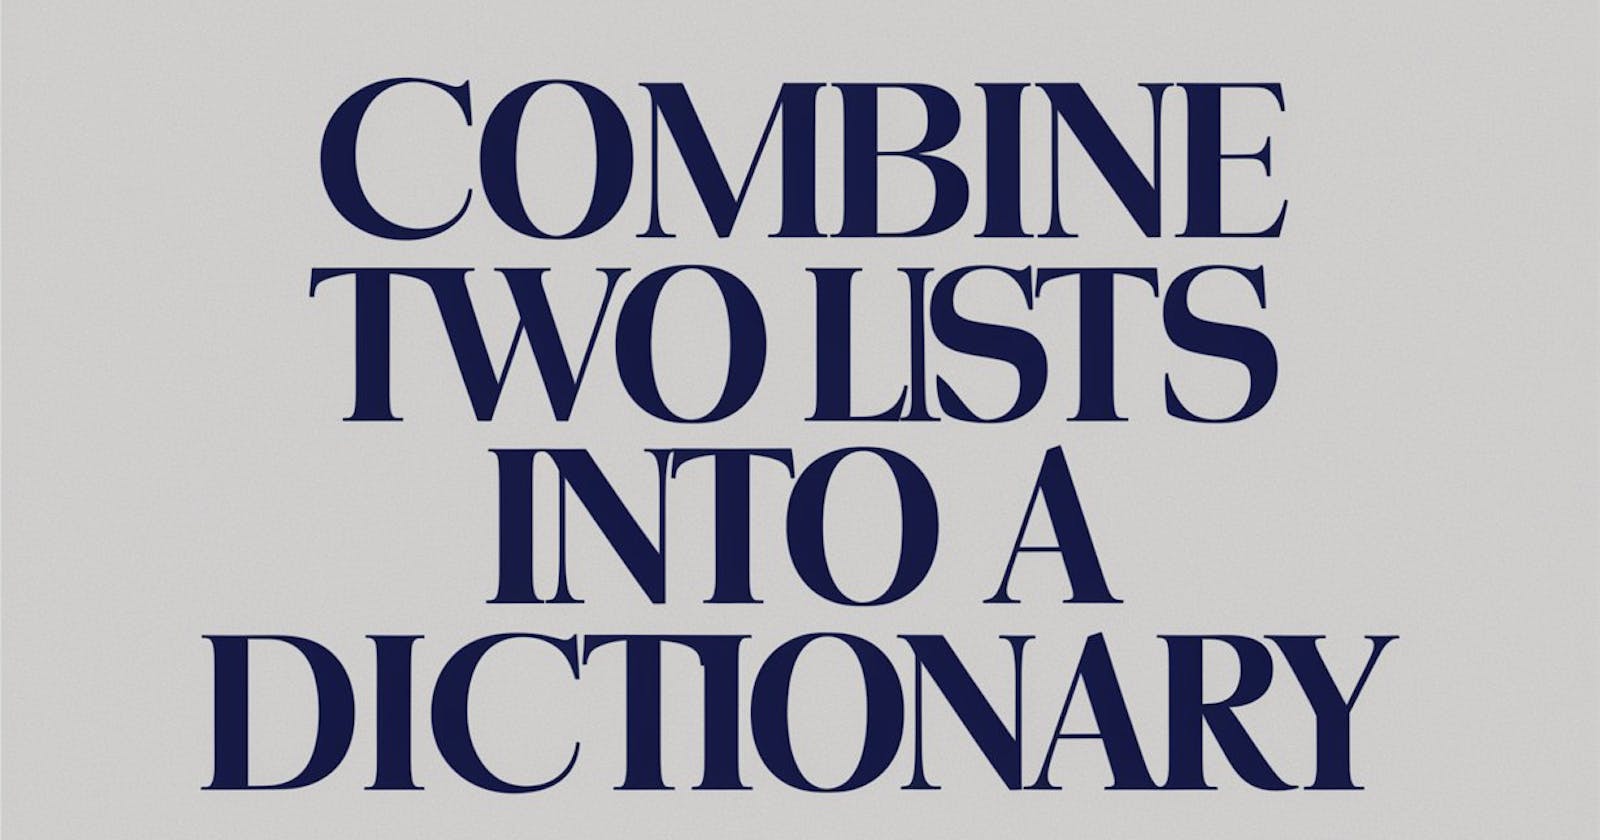 Learn to Combine Two Lists into a Dictionary: 5 Easy Examples